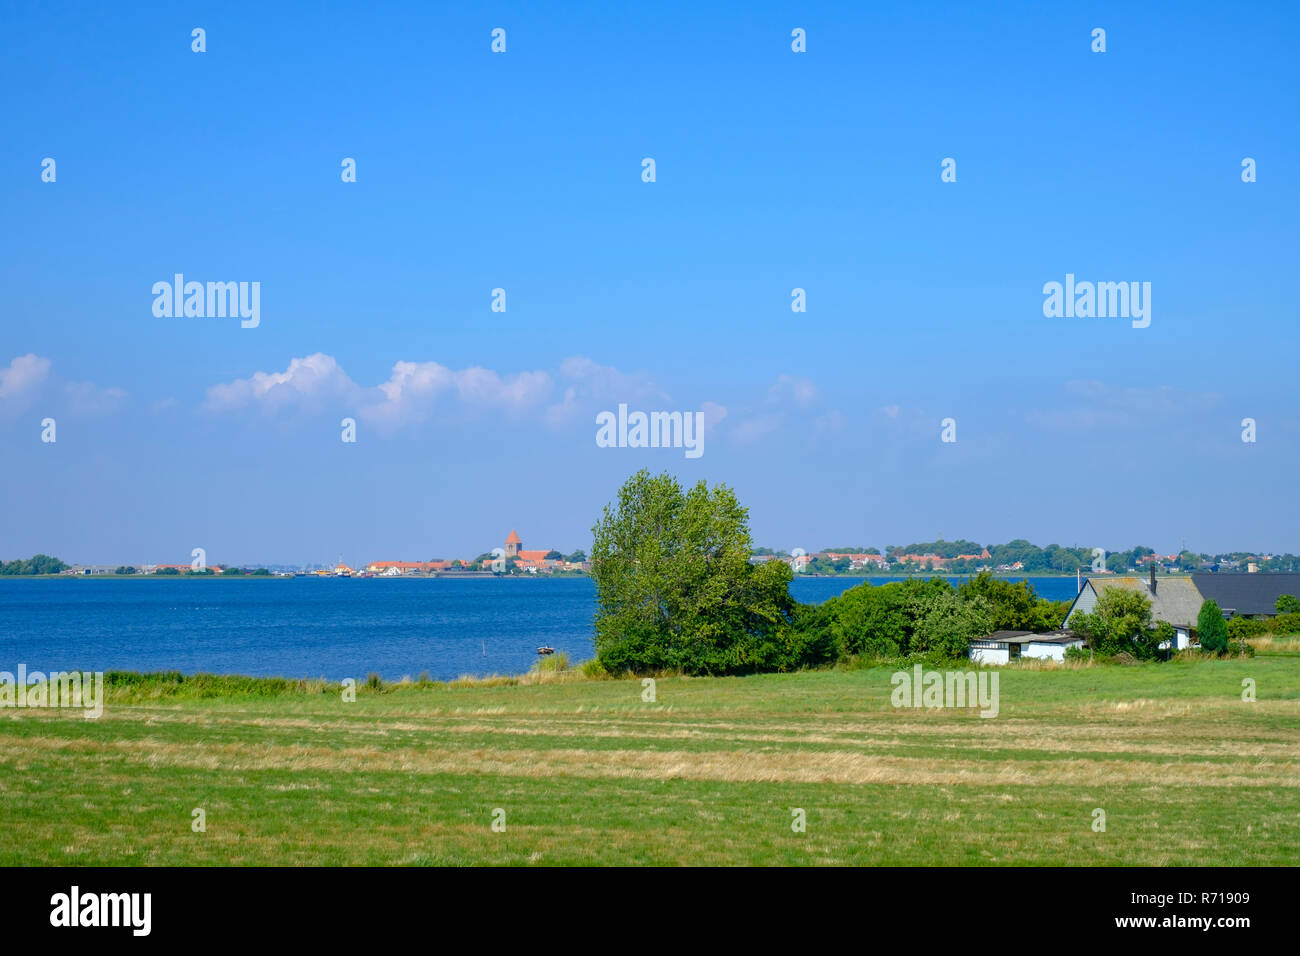 View over Stege Nor Lake to the town of Stege, the main place on Moen Island, Denmark. Stock Photo